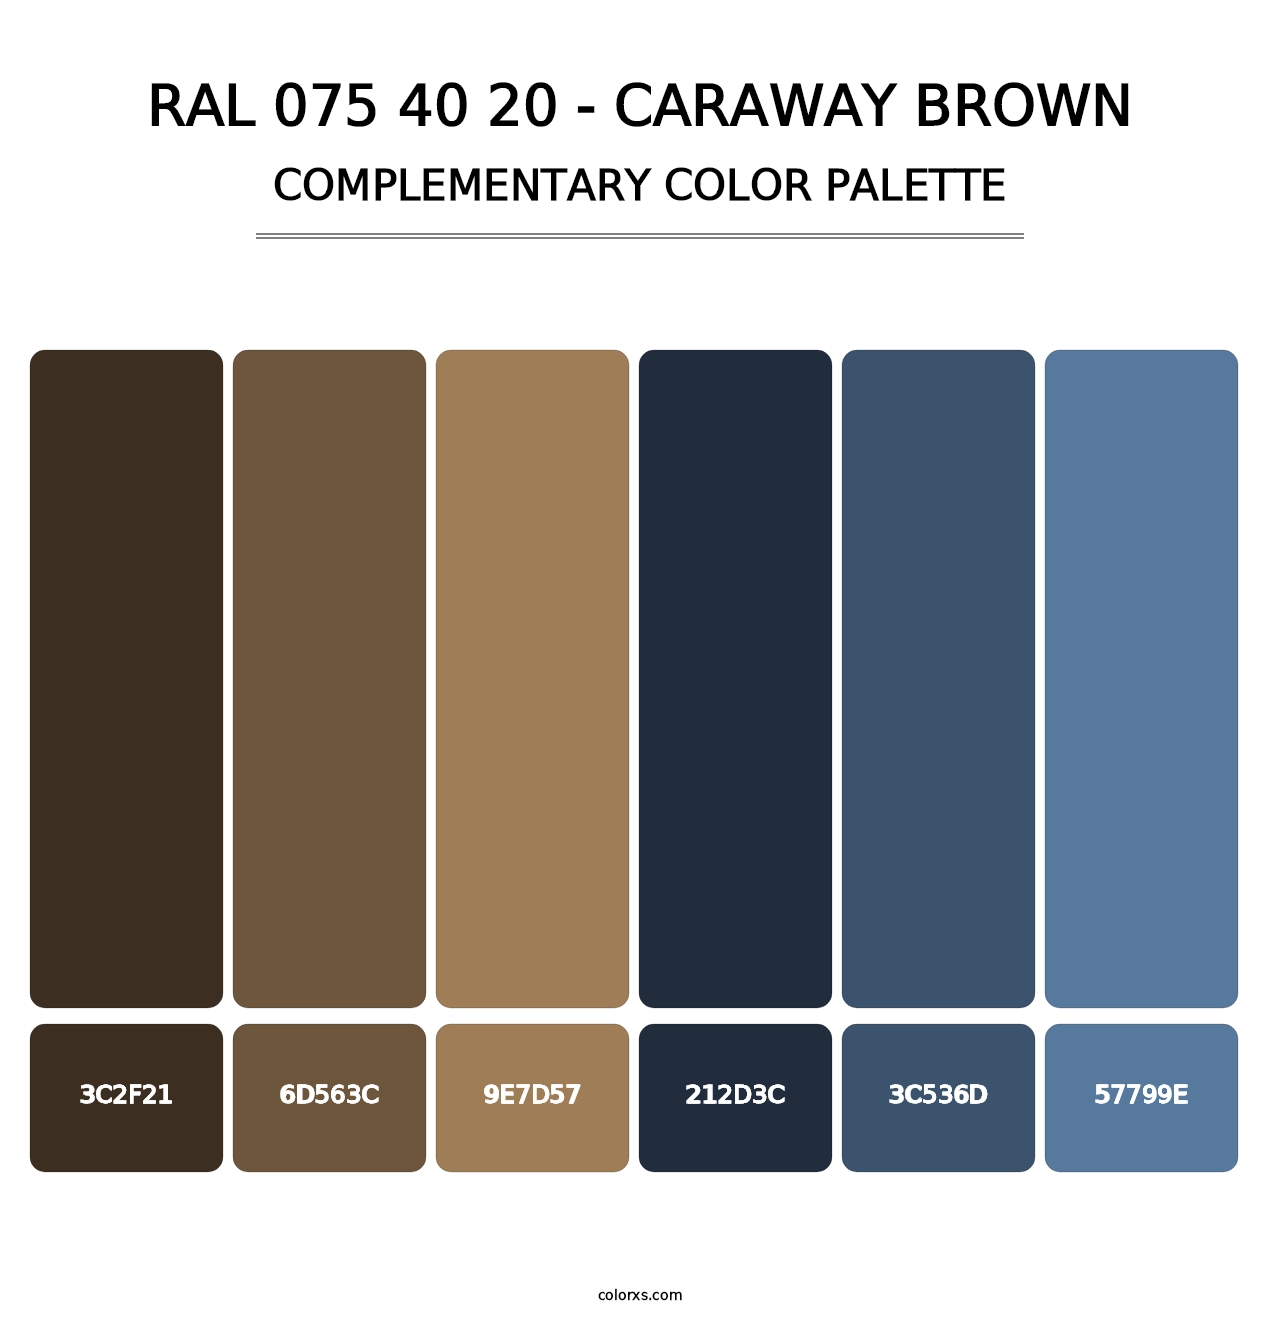 RAL 075 40 20 - Caraway Brown - Complementary Color Palette